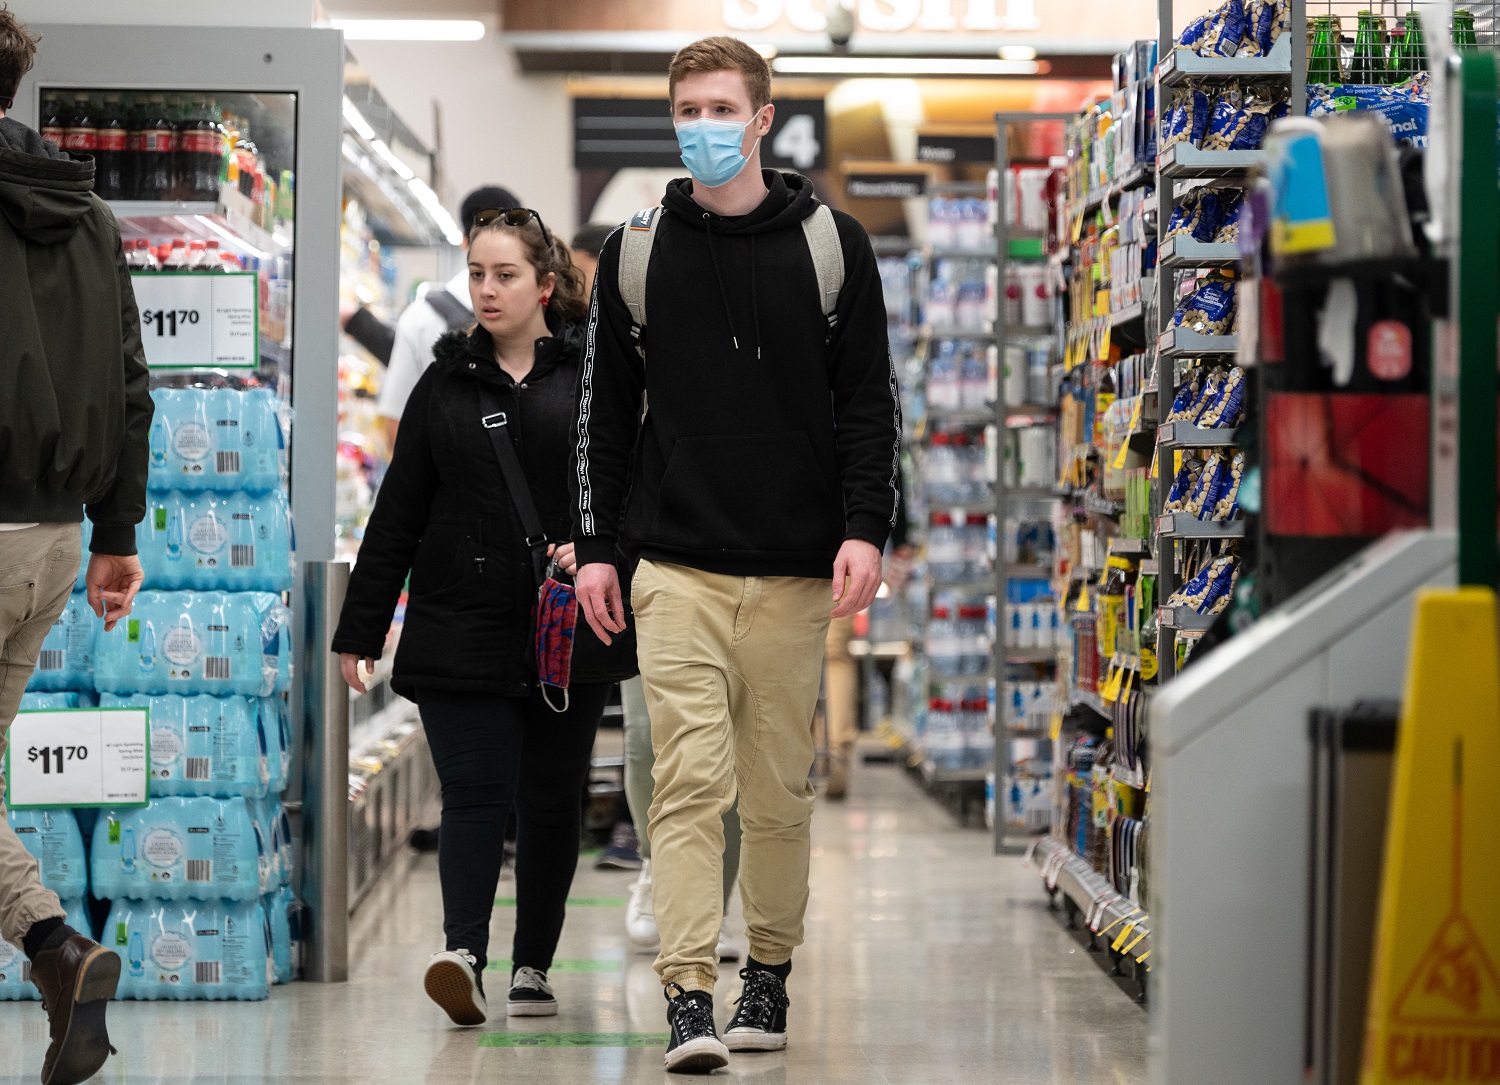 A shopper wearing a face mask inside a Woolworths shop in Sydney, Friday, July 31, 2020. Woolworths are strongly encouraging shoppers in Victoria, NSW and the ACT to wear face masks whilst in store from Monday (3/08). (AAP Image/James Gourley) NO ARCHIVINGNo Use Australia. No Use New Zealand.